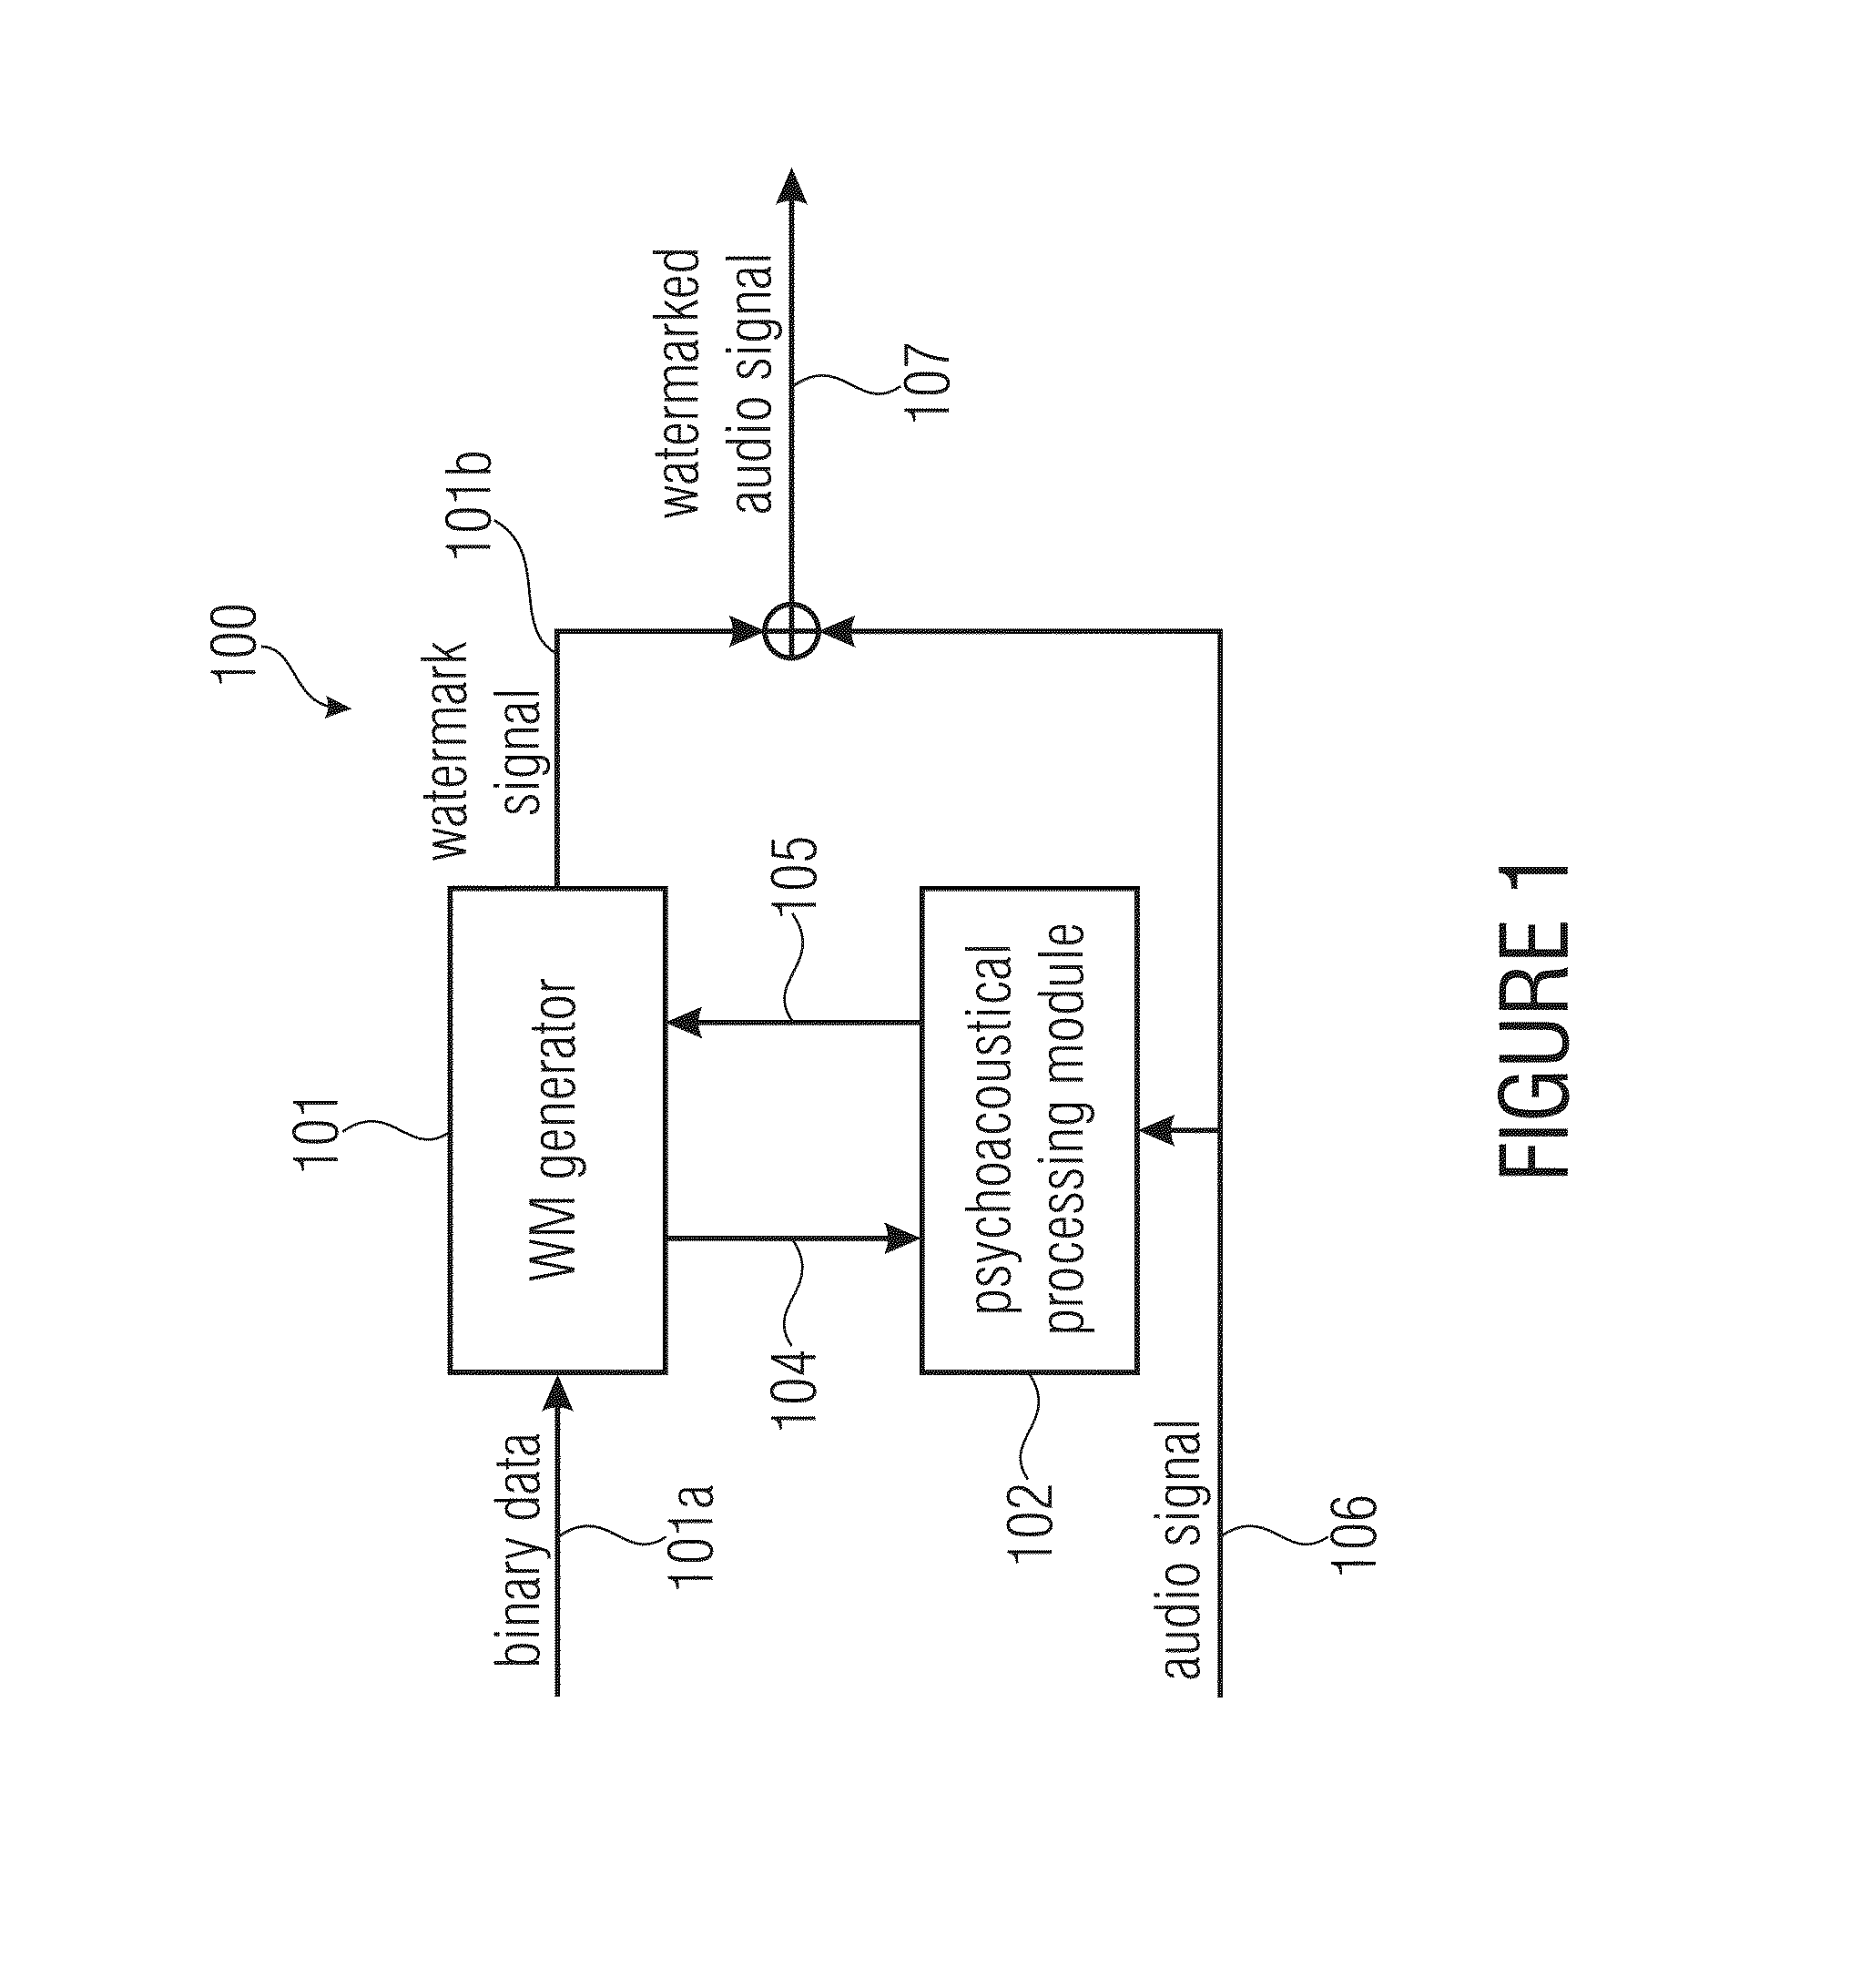 Watermark generator, watermark decoder, method for providing a watermark signal in dependence on binary message data, method for providing binary message data in dependence on a watermarked signal and computer program using a differential encoding